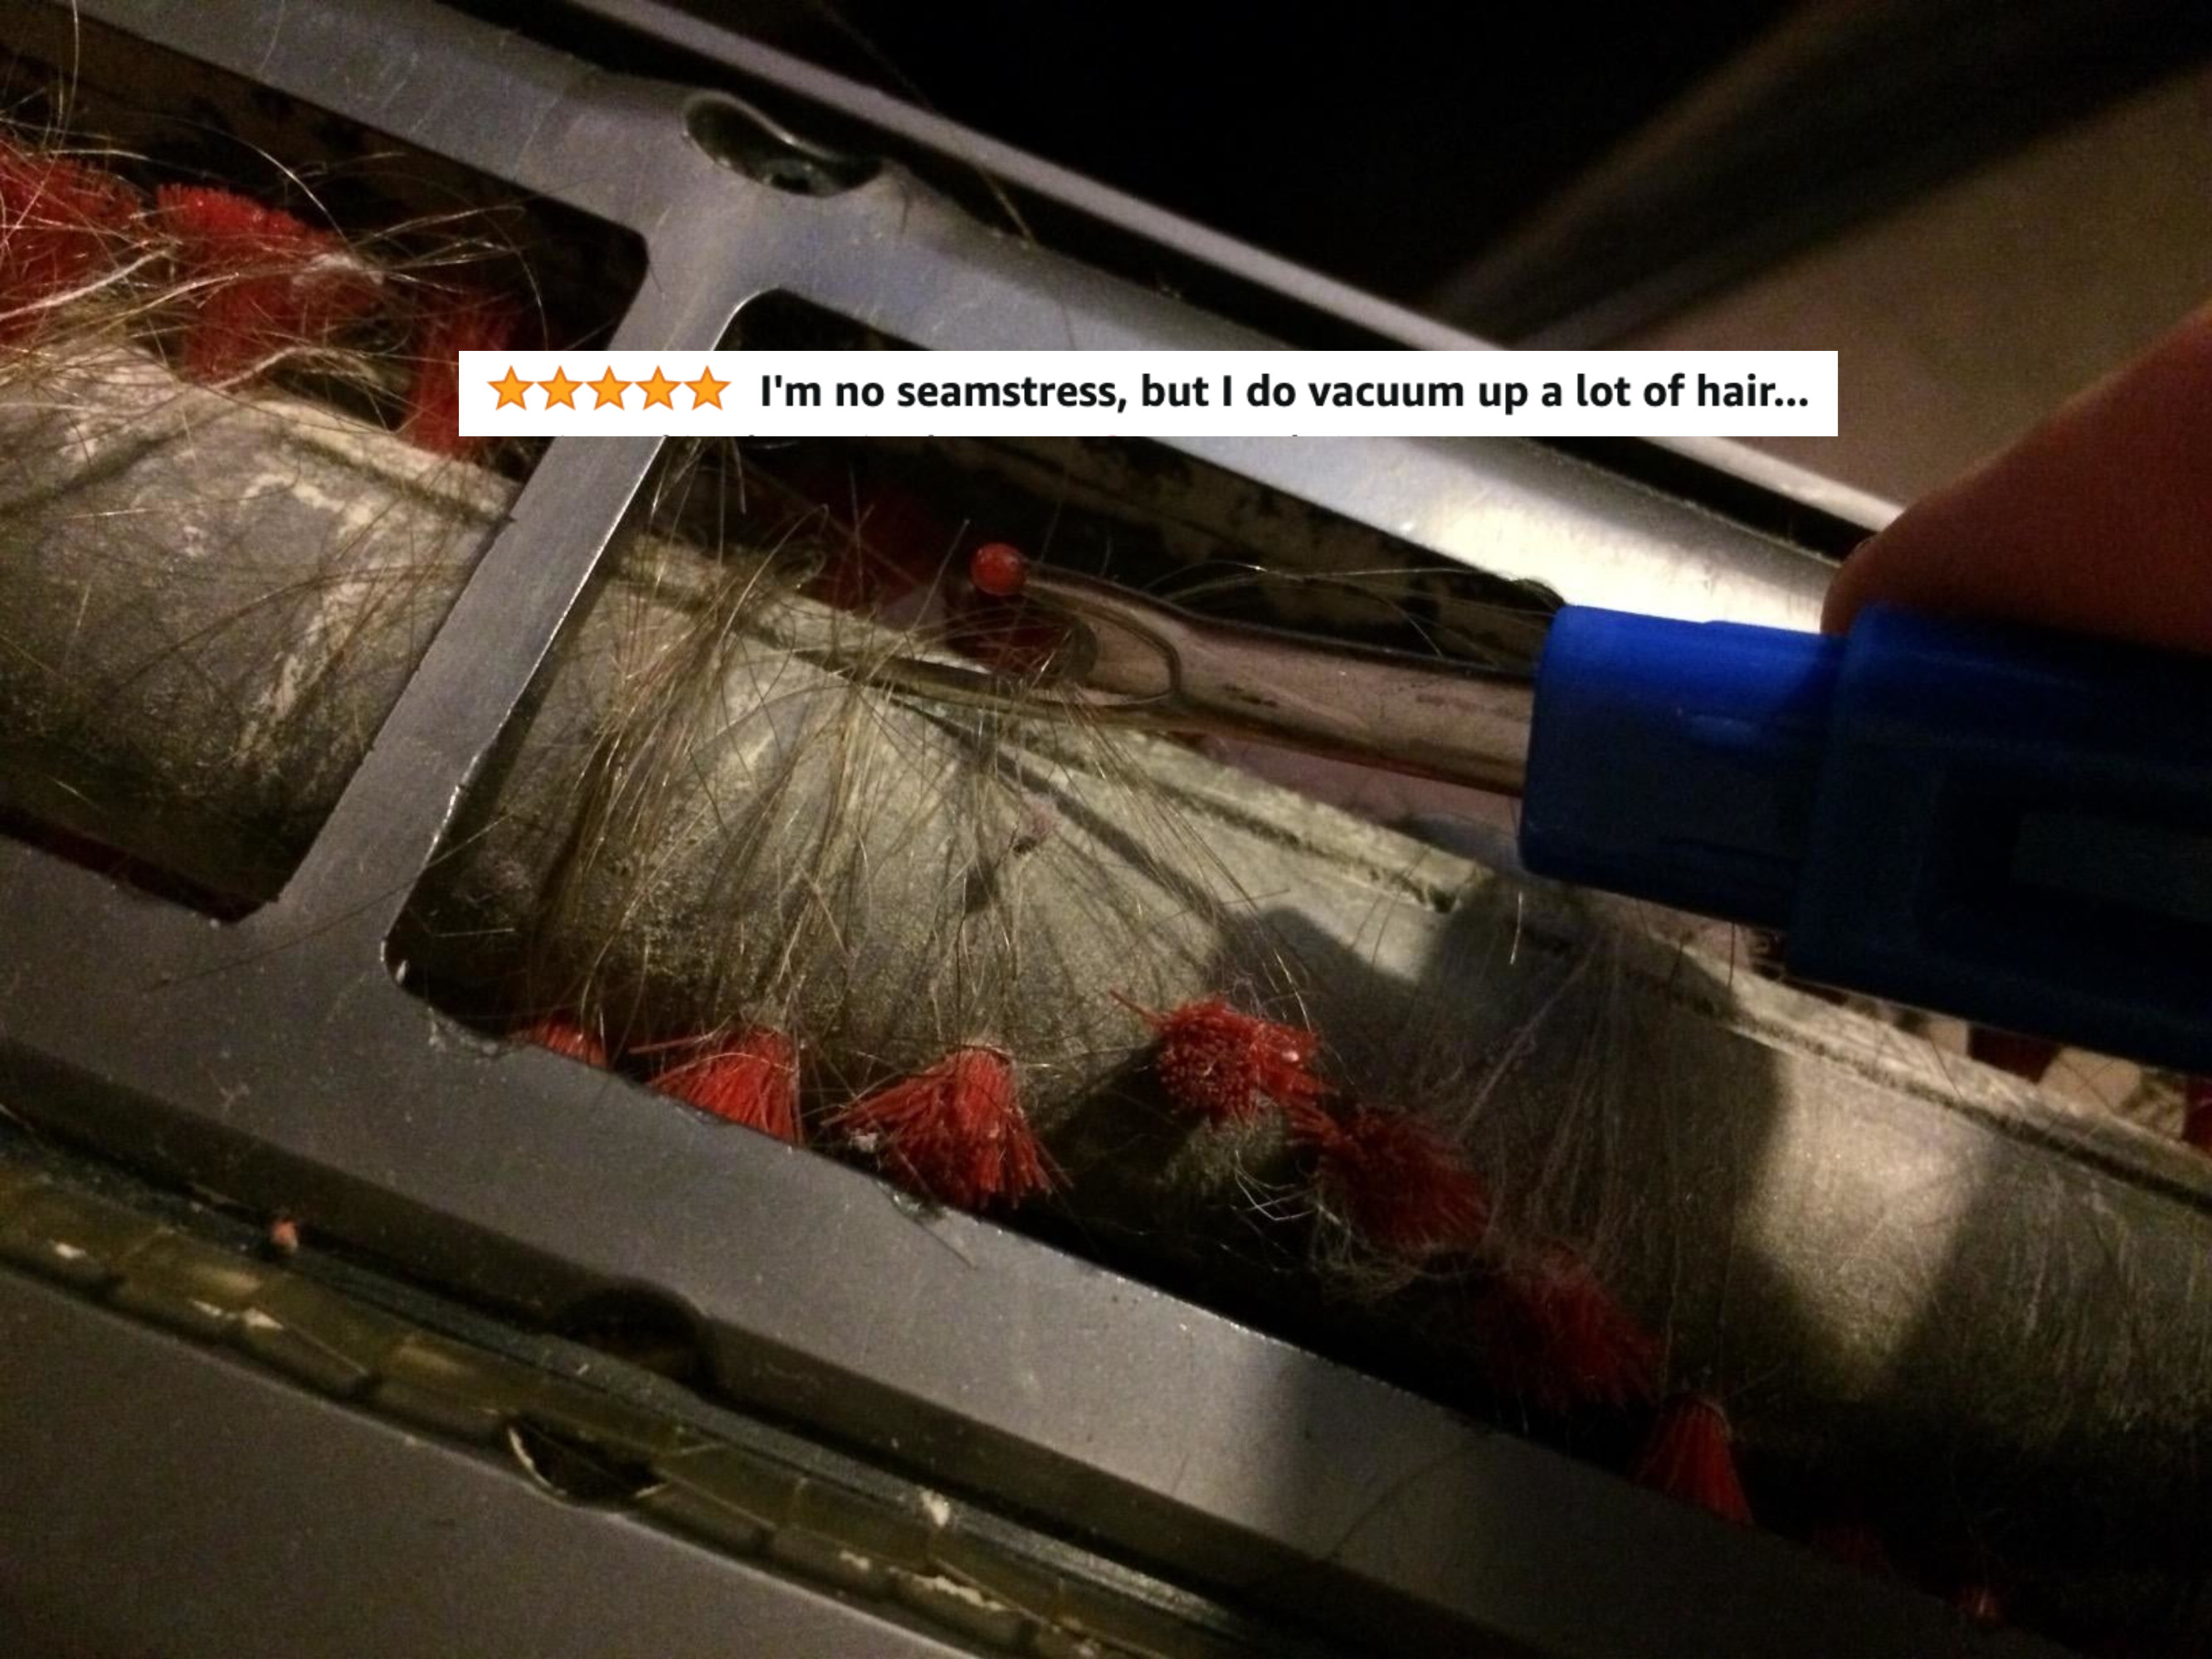 A reviewer using the seam ripper to cut through hair wrapped around their vacuum roller with five stars and text &quot;I&#x27;m no seamstress, but I do vacuum up a lot of hair&quot;